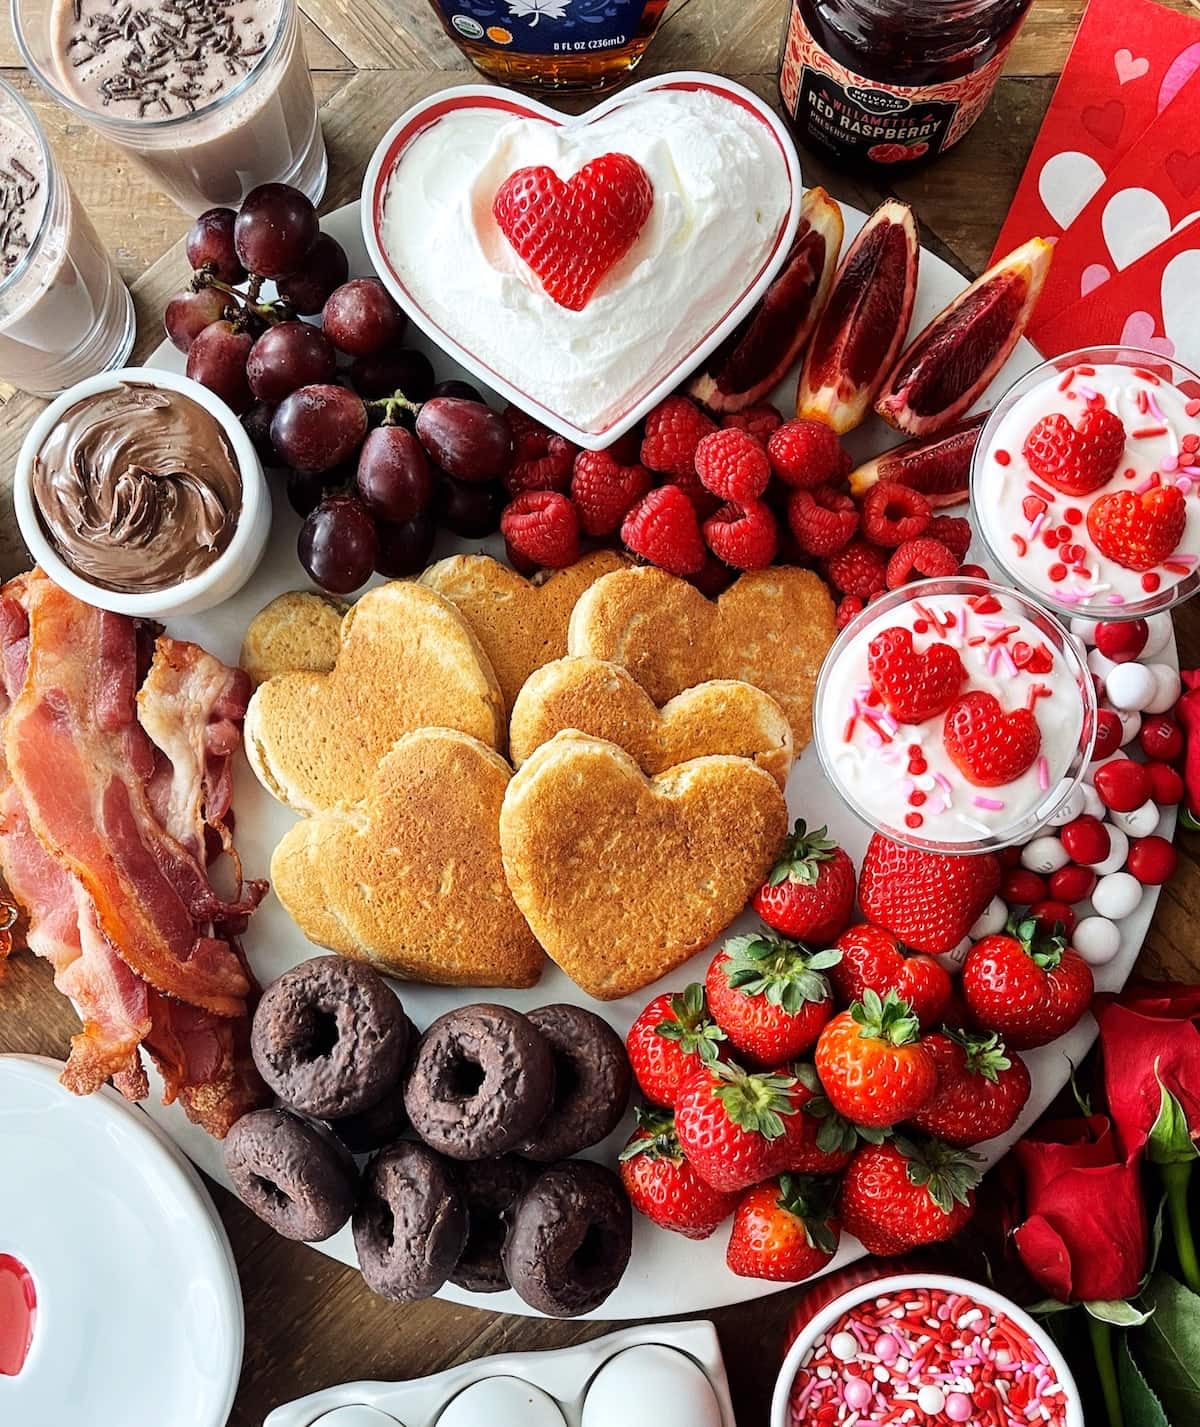 charcuterie-with-heart-shaped-pancakes-strawberries-grapes-breastfast-ideas